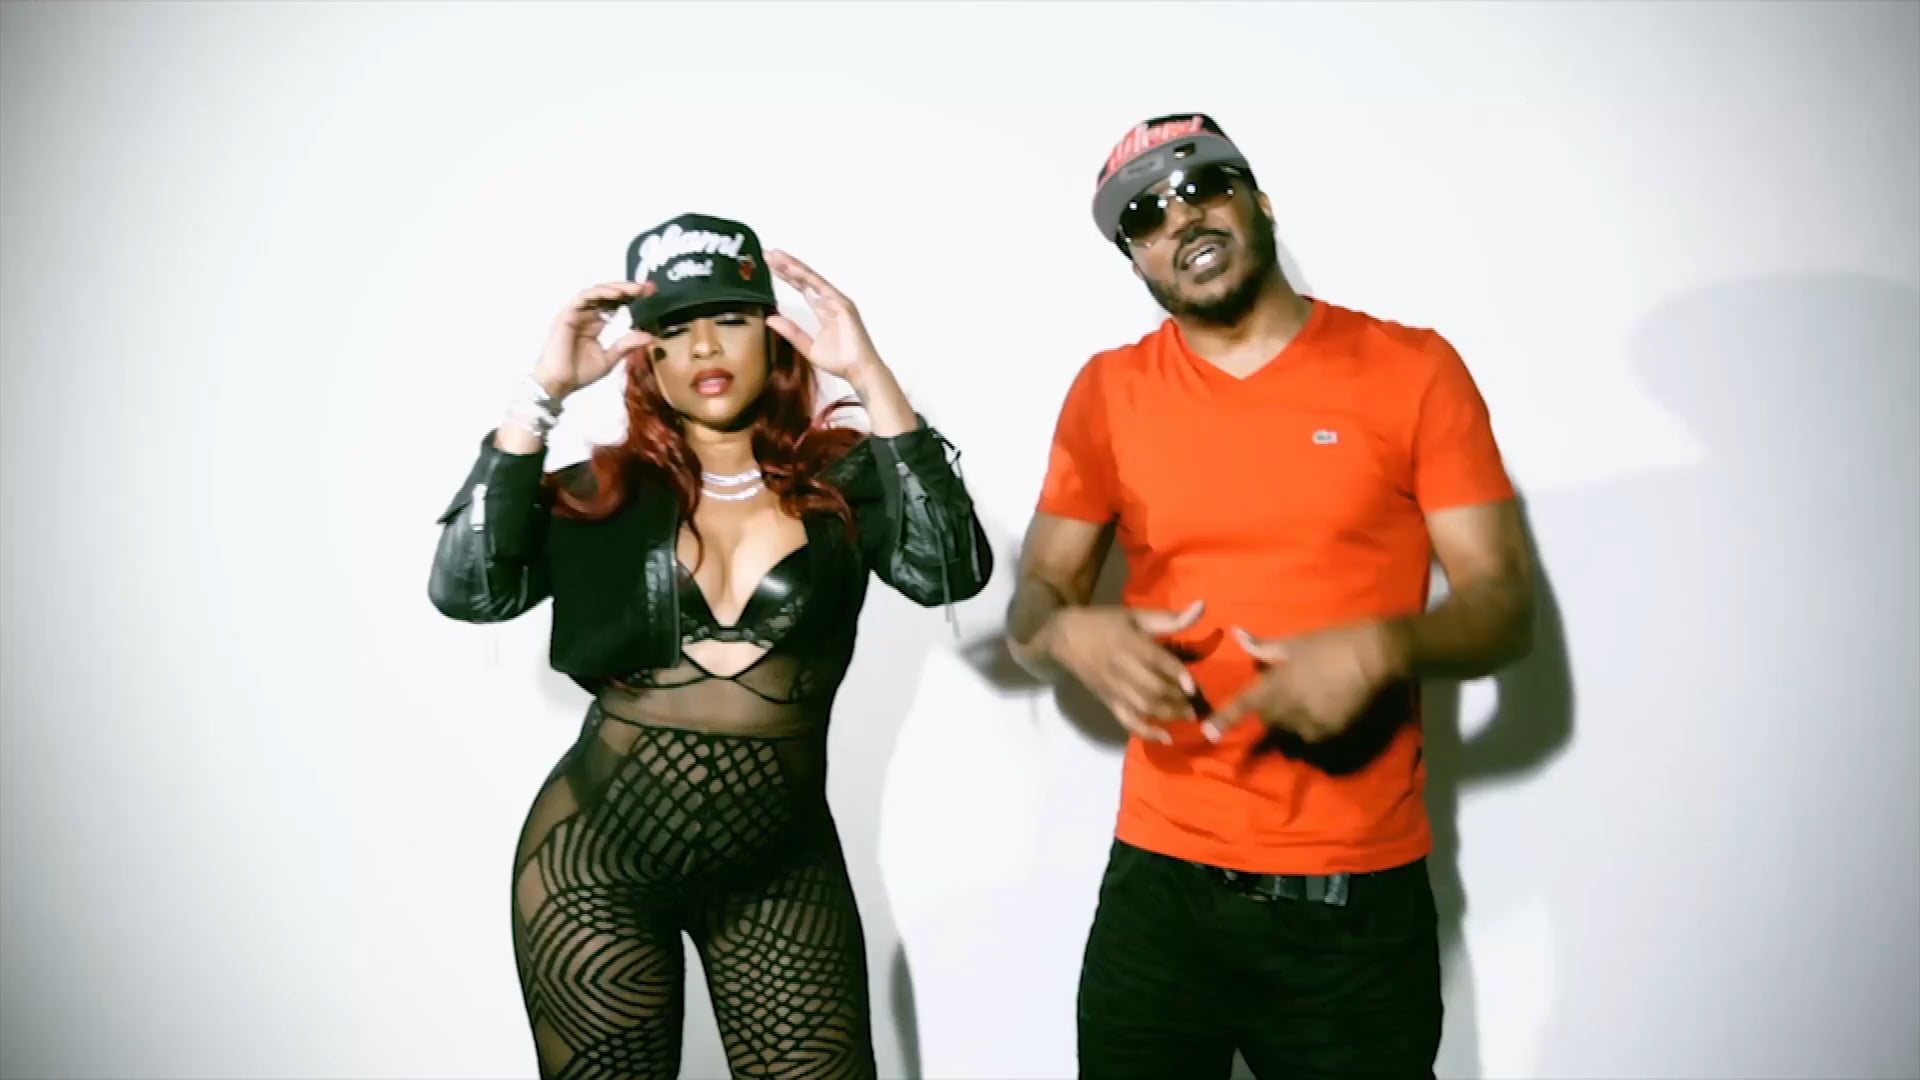 Watch P. Chace ft Trina NBA (Nothing But Ass) on our Free Roku Channel